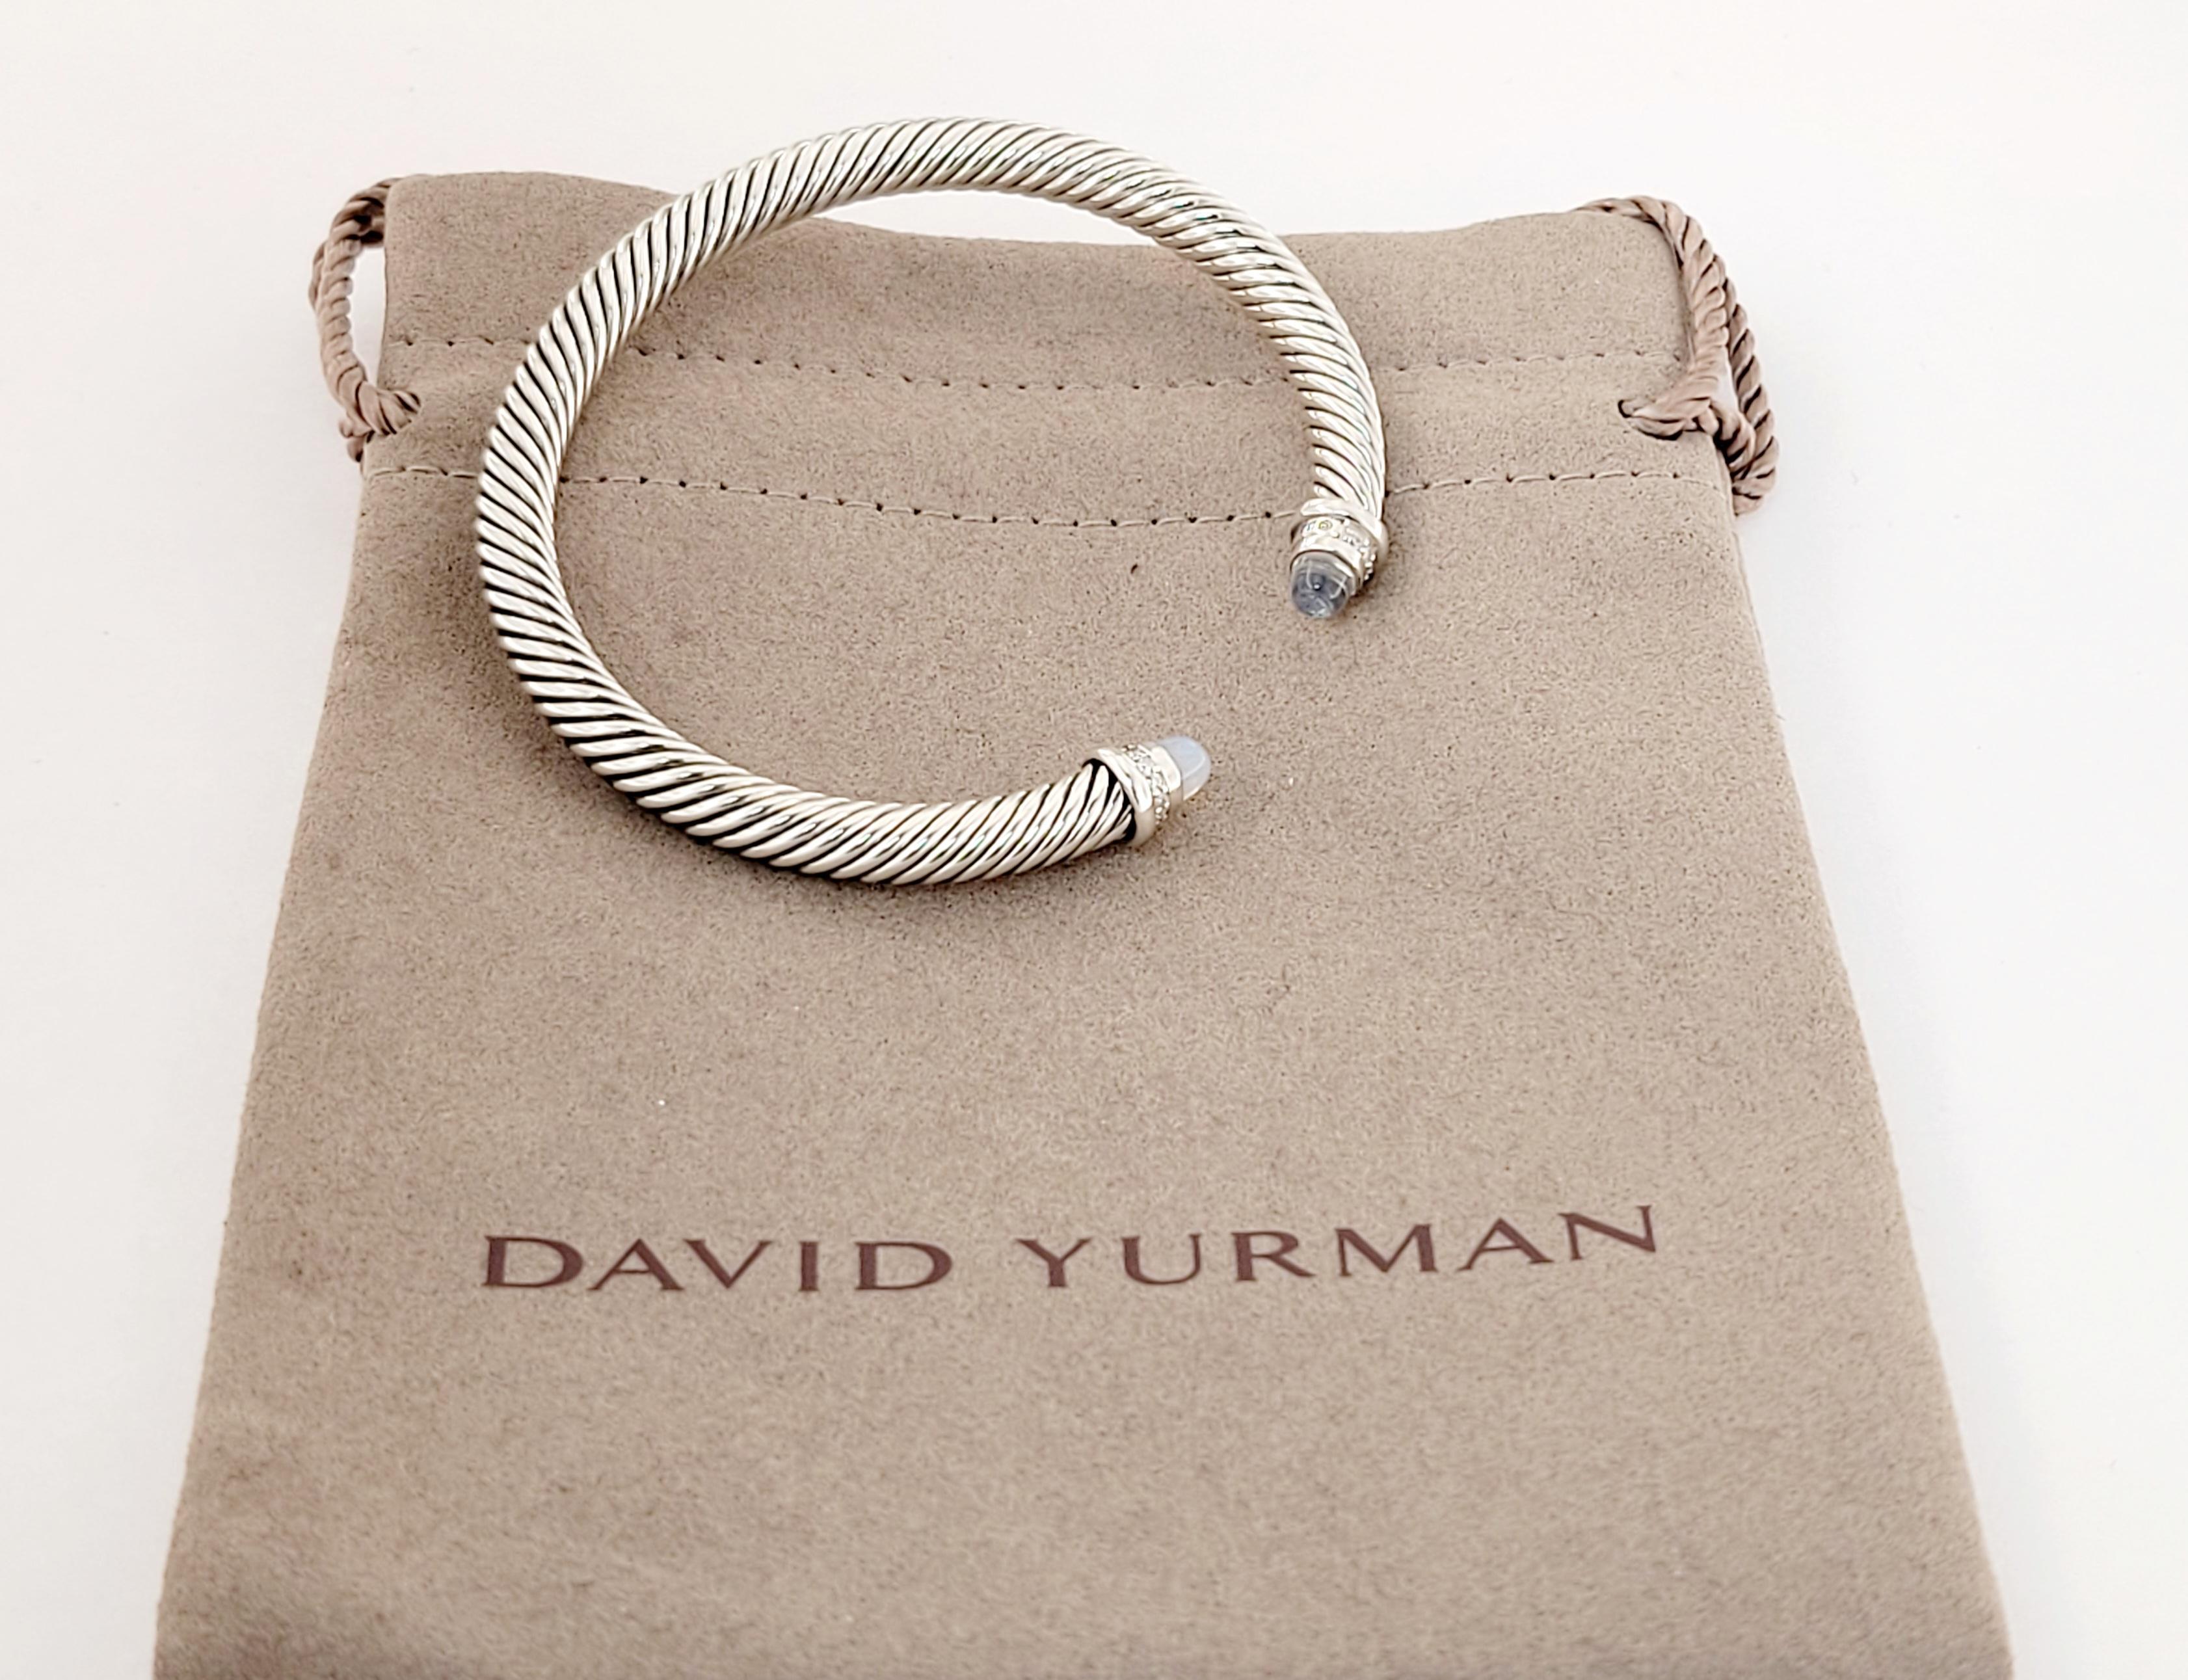 Brand David Yurman
Brand new, never worn
Gender women
Size small 
Material  sterling silver
Moonstone and Diamonds.
Bracelet width 5mm
Weight 25.3gr
Comes with David Yurman  pouch